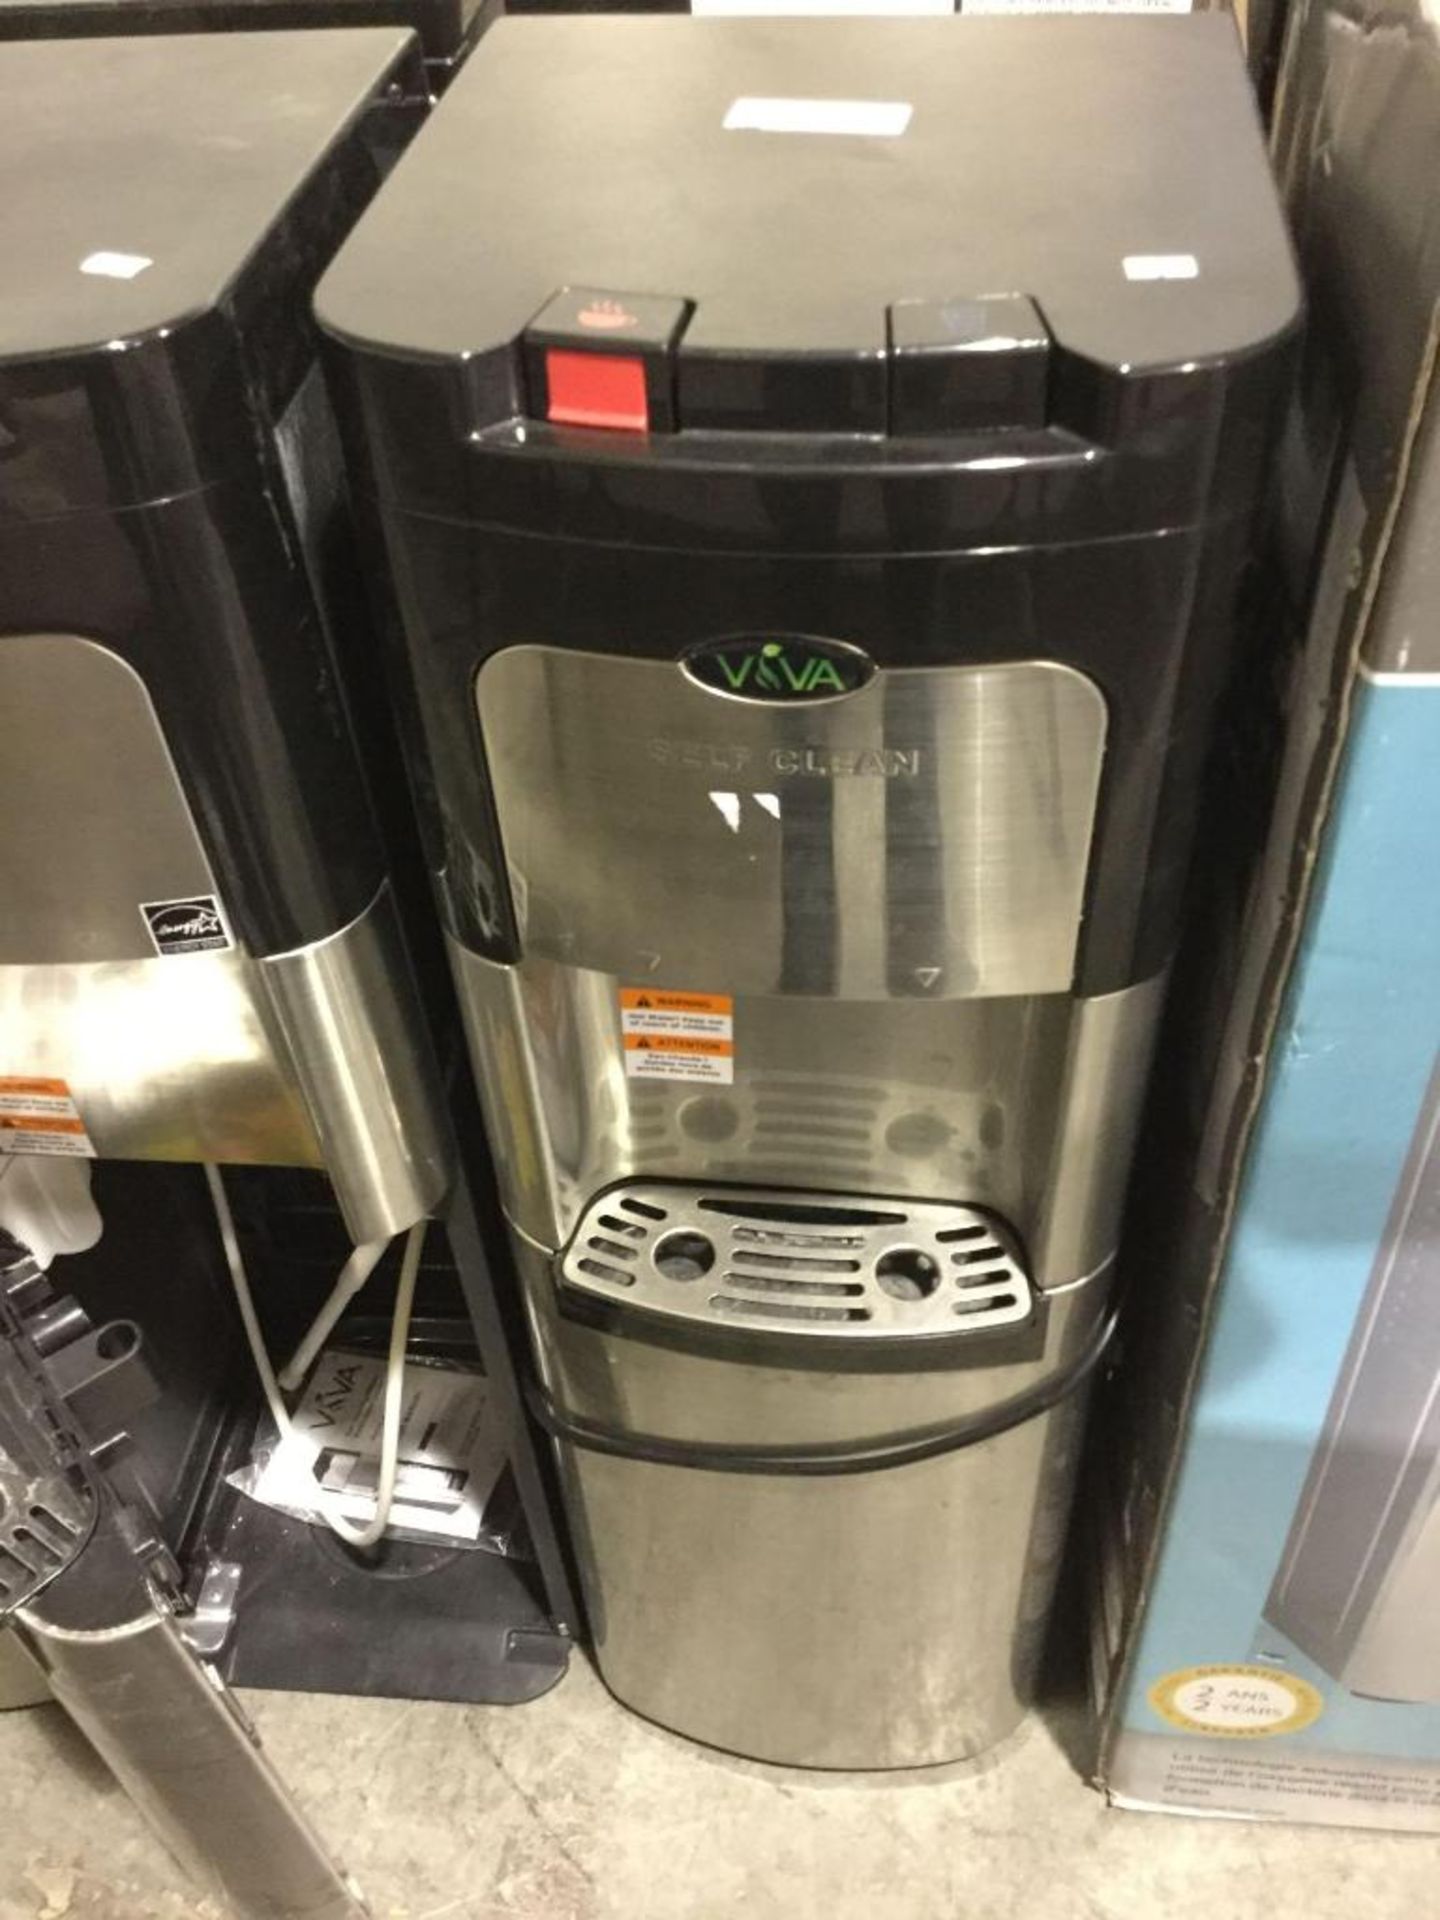 VIVA Stainless Steel Self-Cleaning Water Cooler